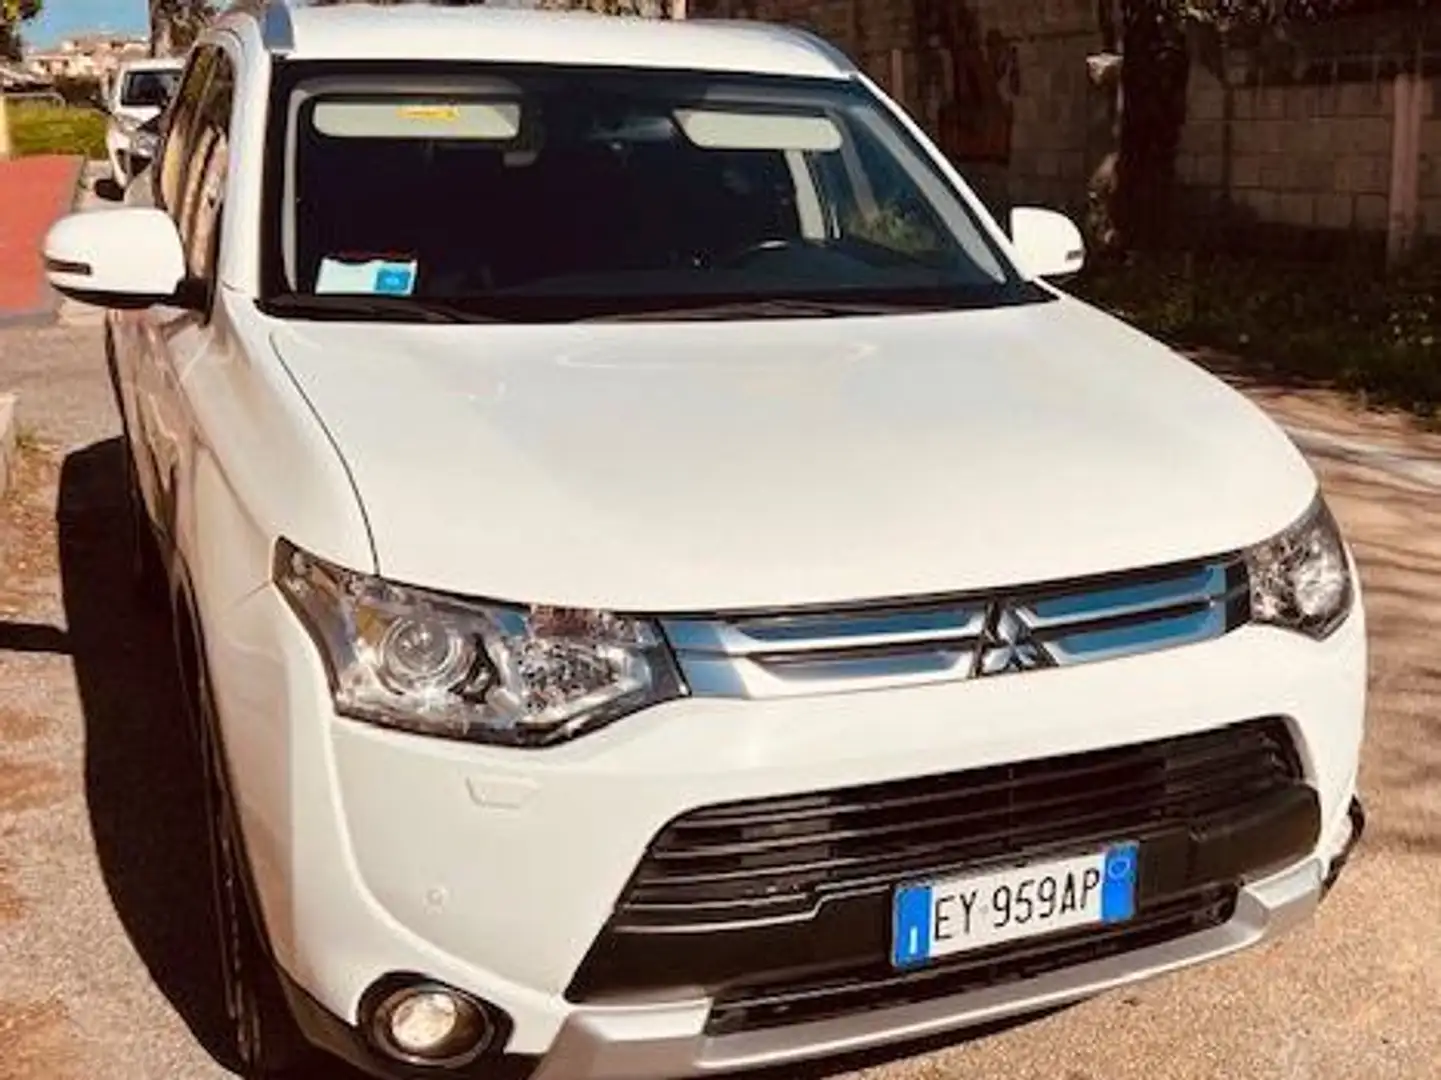 Mitsubishi Outlander Outlander III 2014 2.2 di-d cleartec Instyle 4wd 7 Bianco - 1